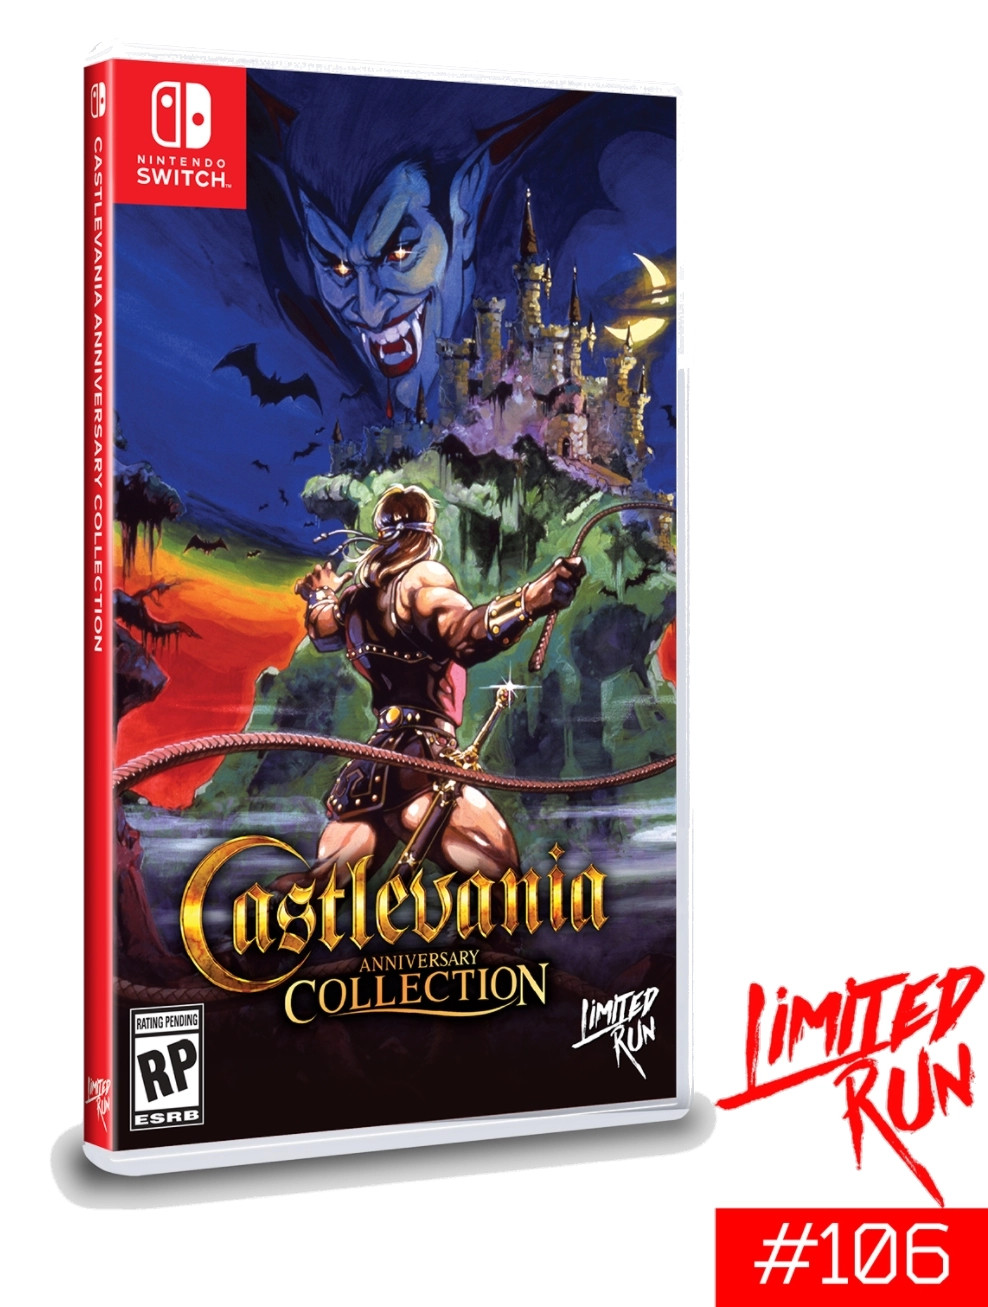 Castlevania - Anniversary Collection (Limited Run Games) - Nintendo Switch